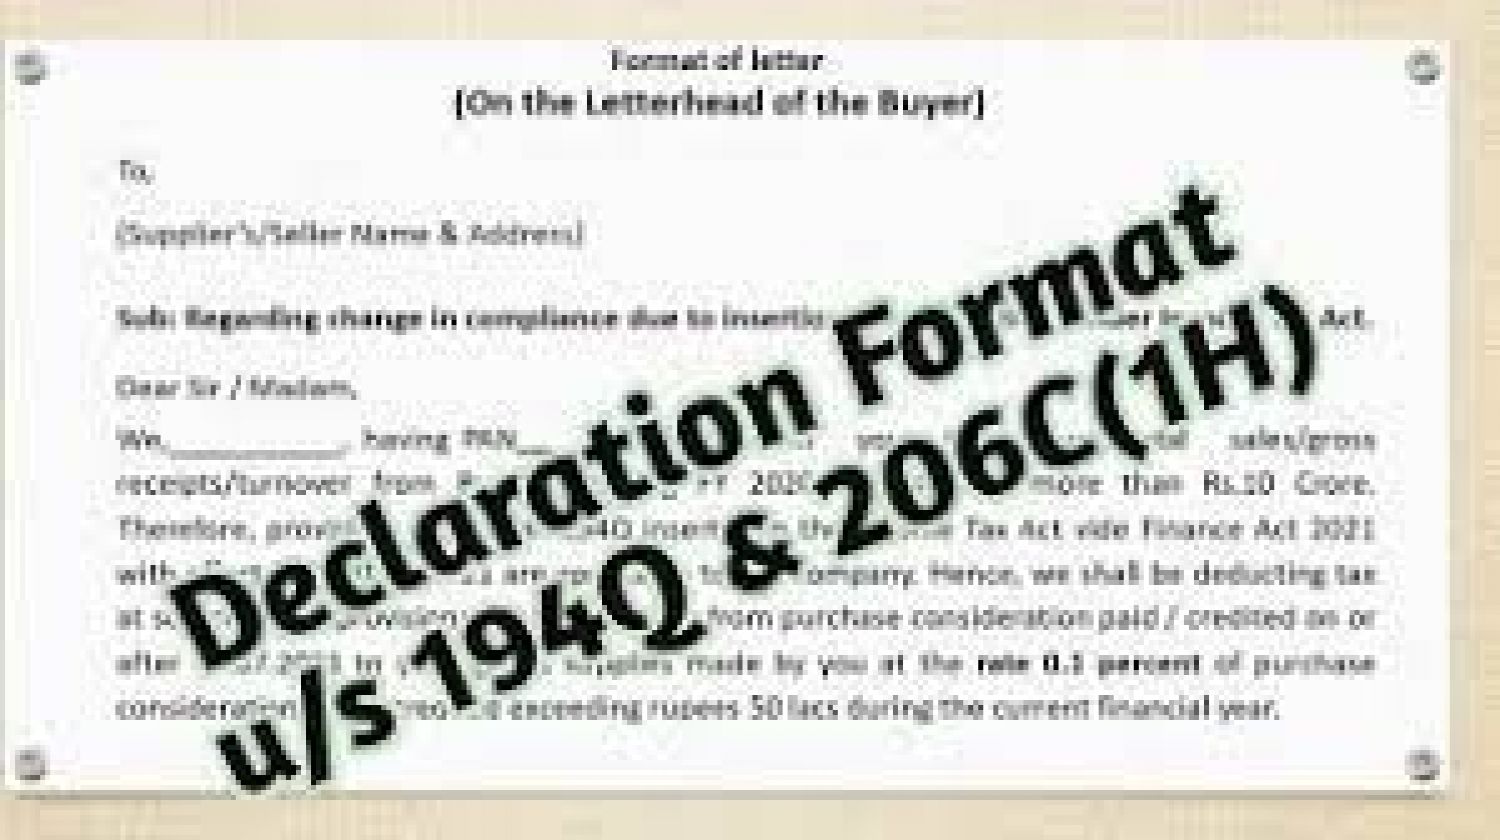 Declaration format in relation to Section 194Q, 206AB & 206CCA 